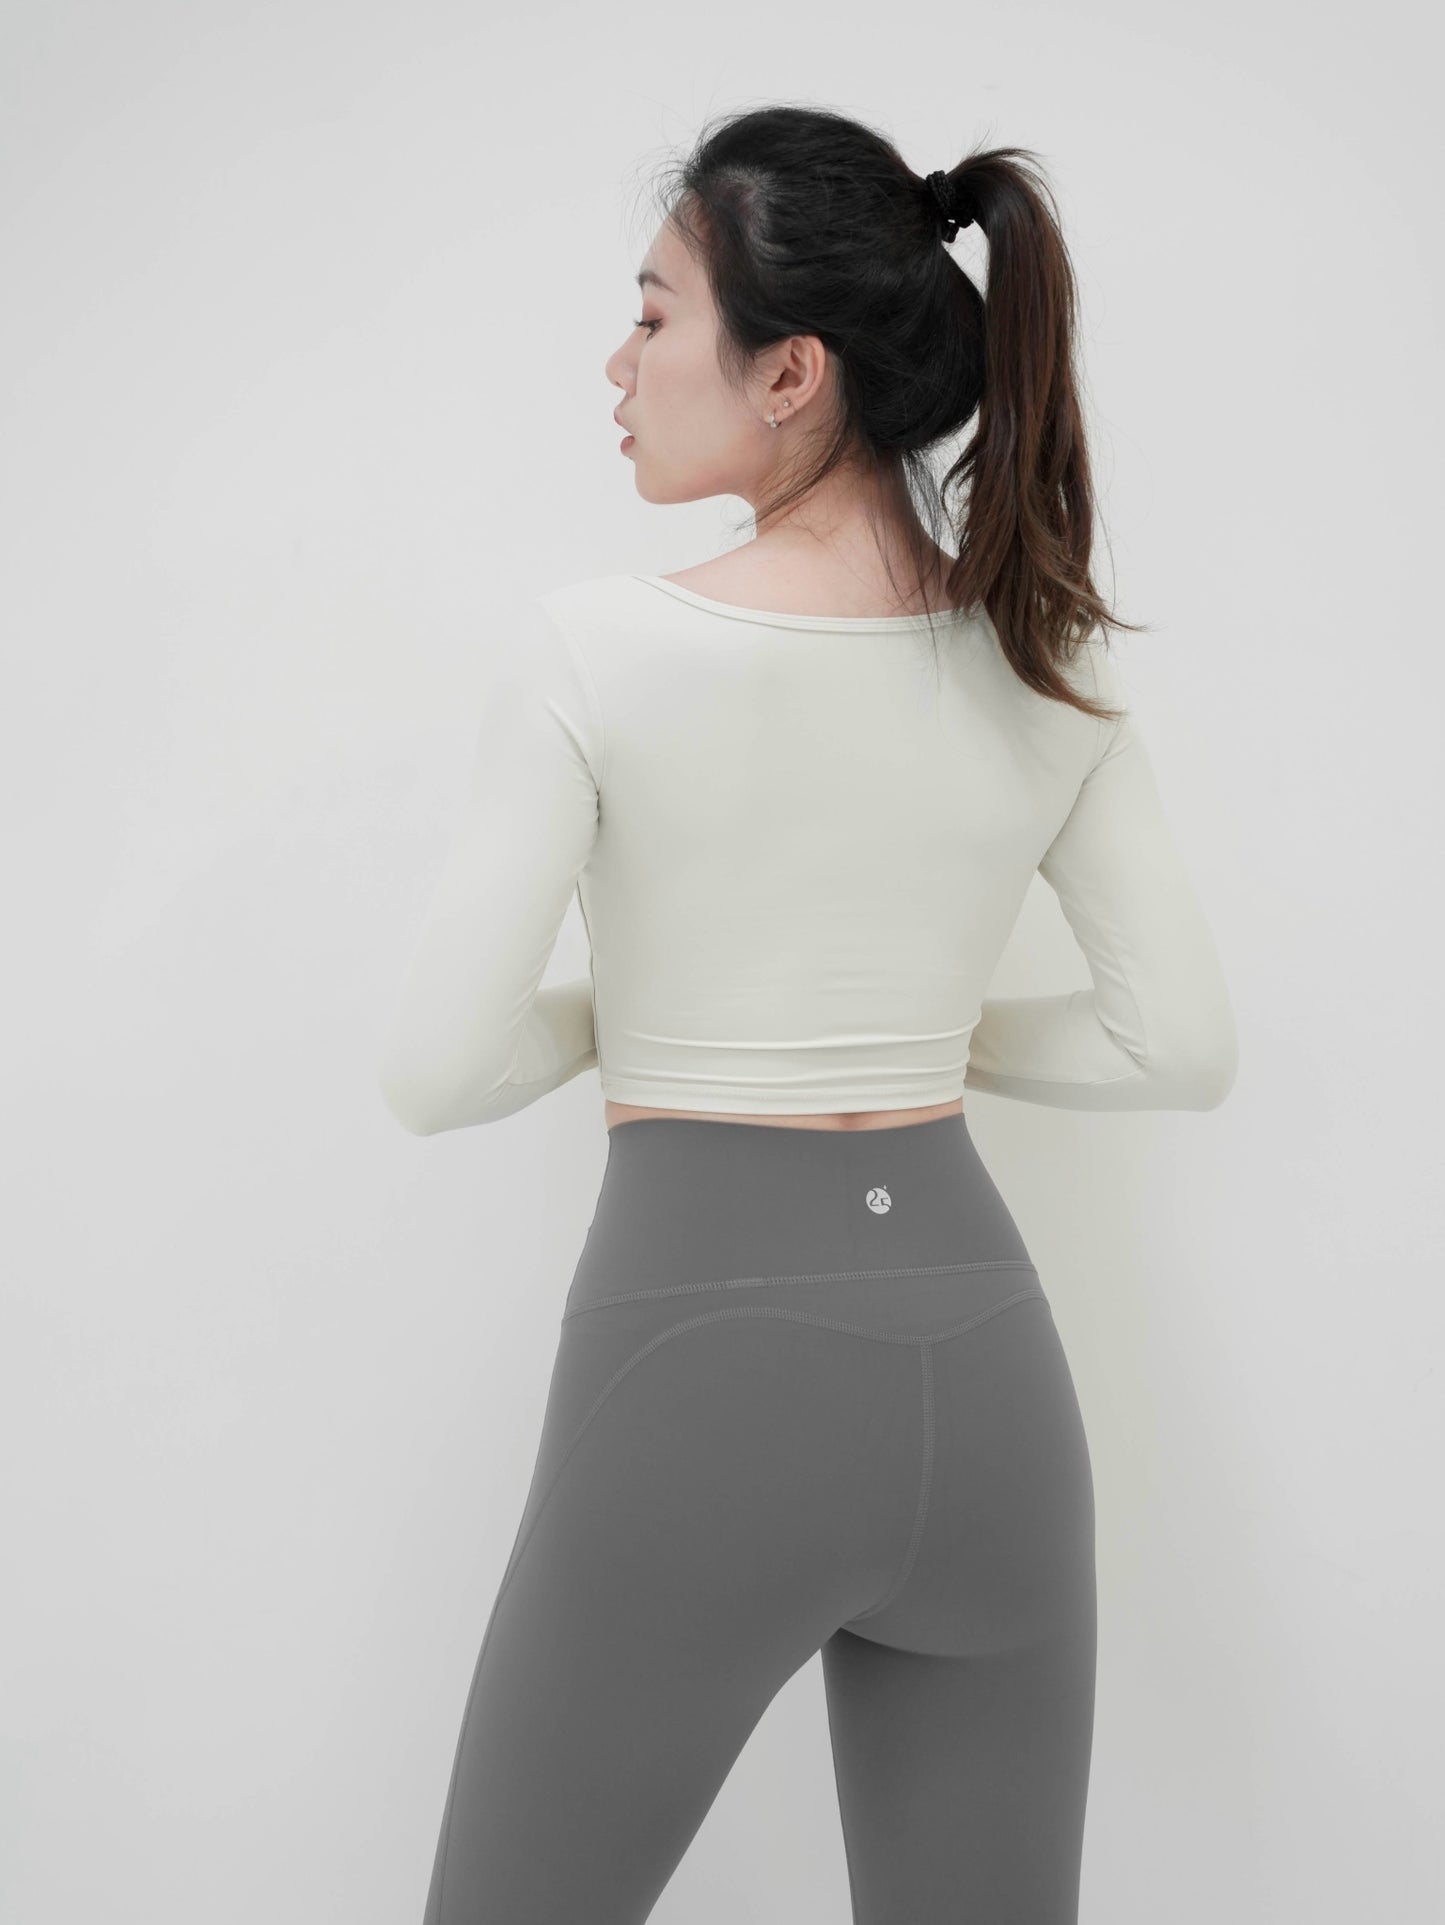 Pre-order/Recommendation for heavy training-Shaping quick-drying 9-minute leggings